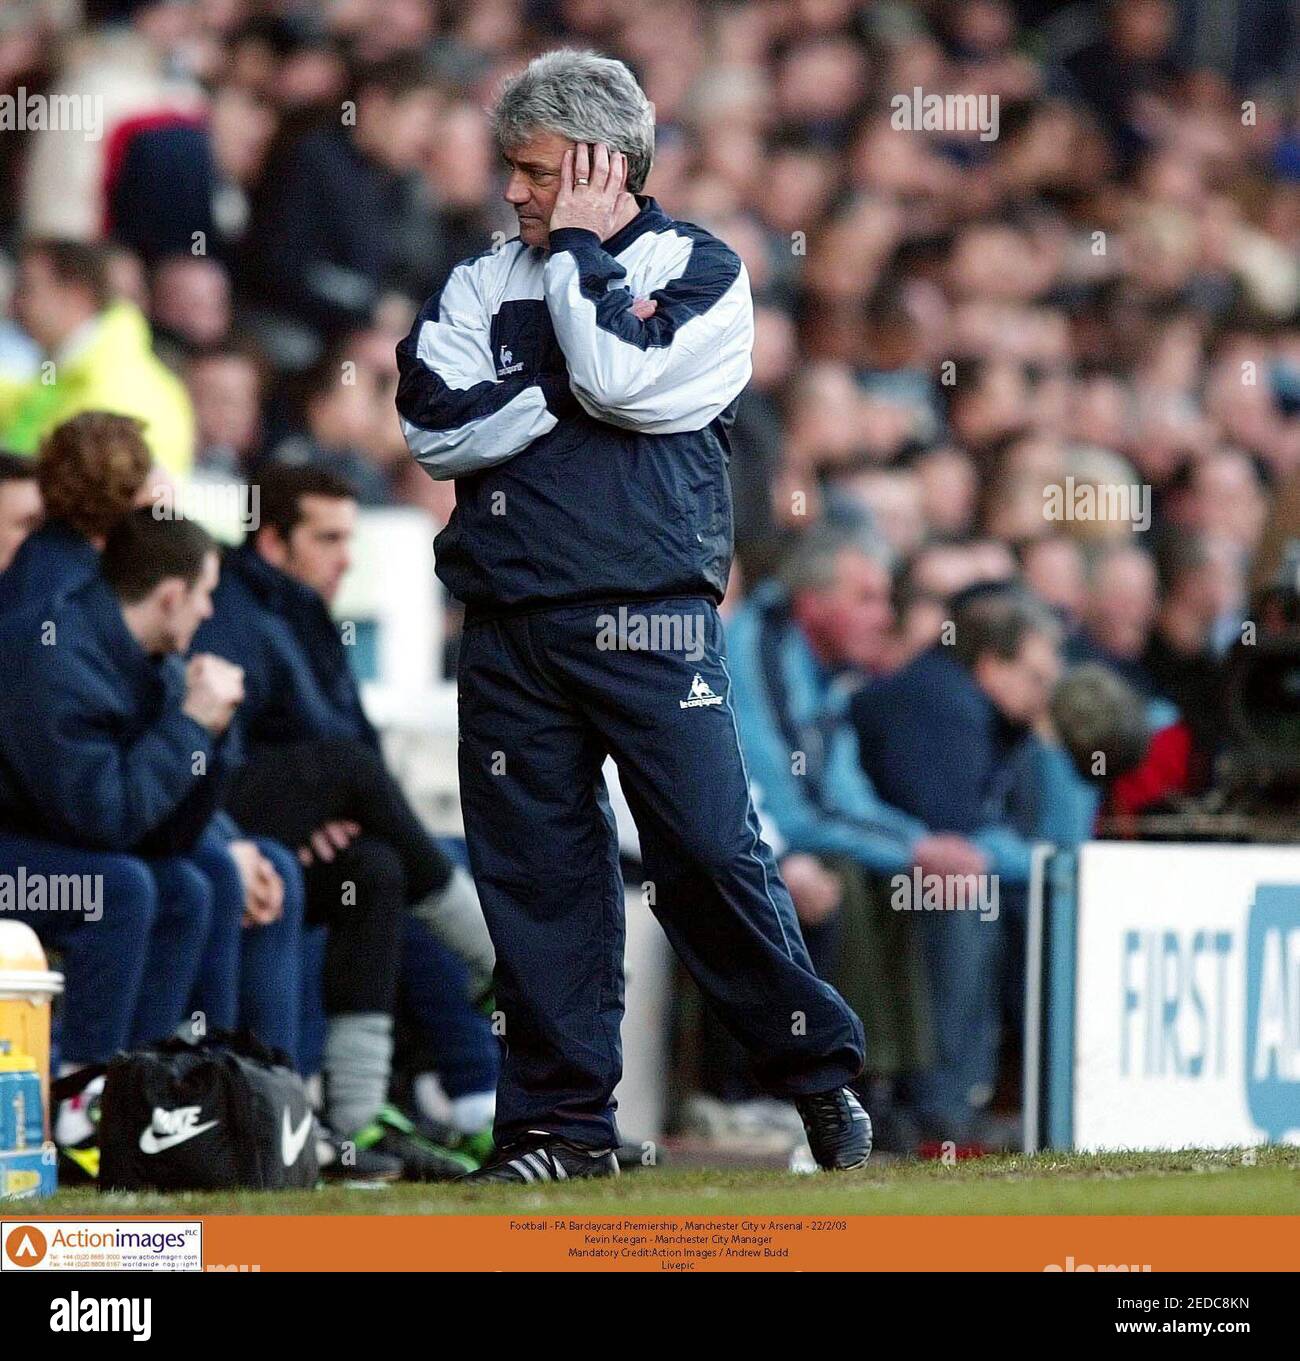 Football - FA Barclaycard Premiership , Manchester City v Arsenal - 22/2/03  Kevin Keegan - Manchester City Manager  Mandatory Credit:Action Images / Andrew Budd  Livepic Stock Photo